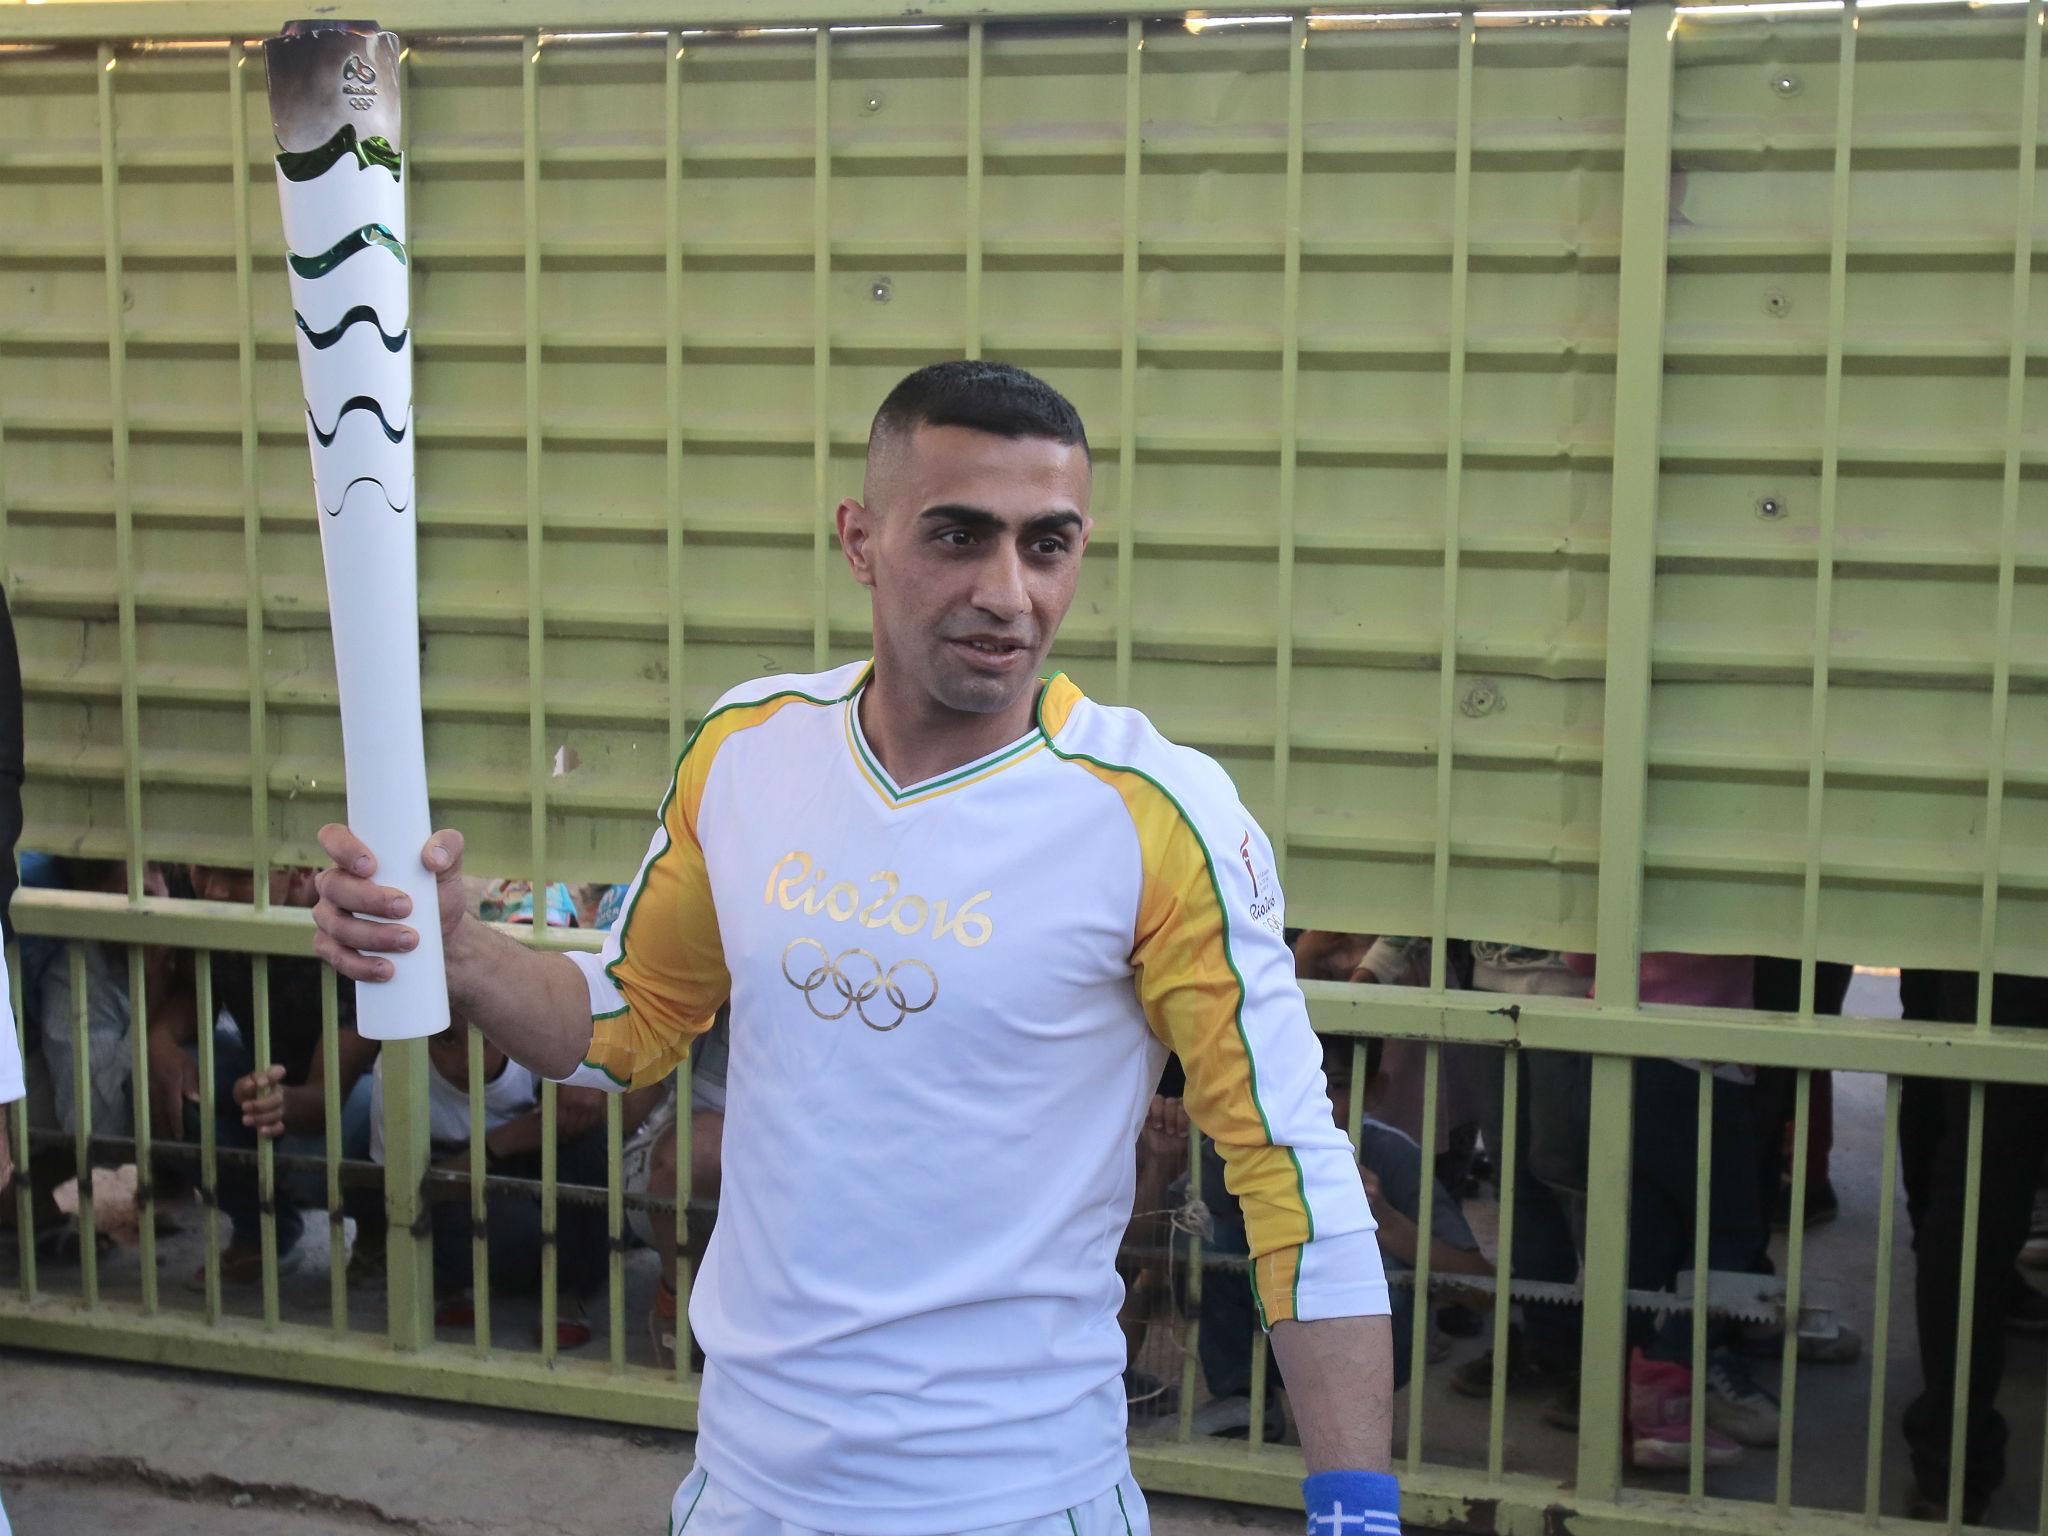 Ibrahim Al-Hussein carrying the Olympic torch